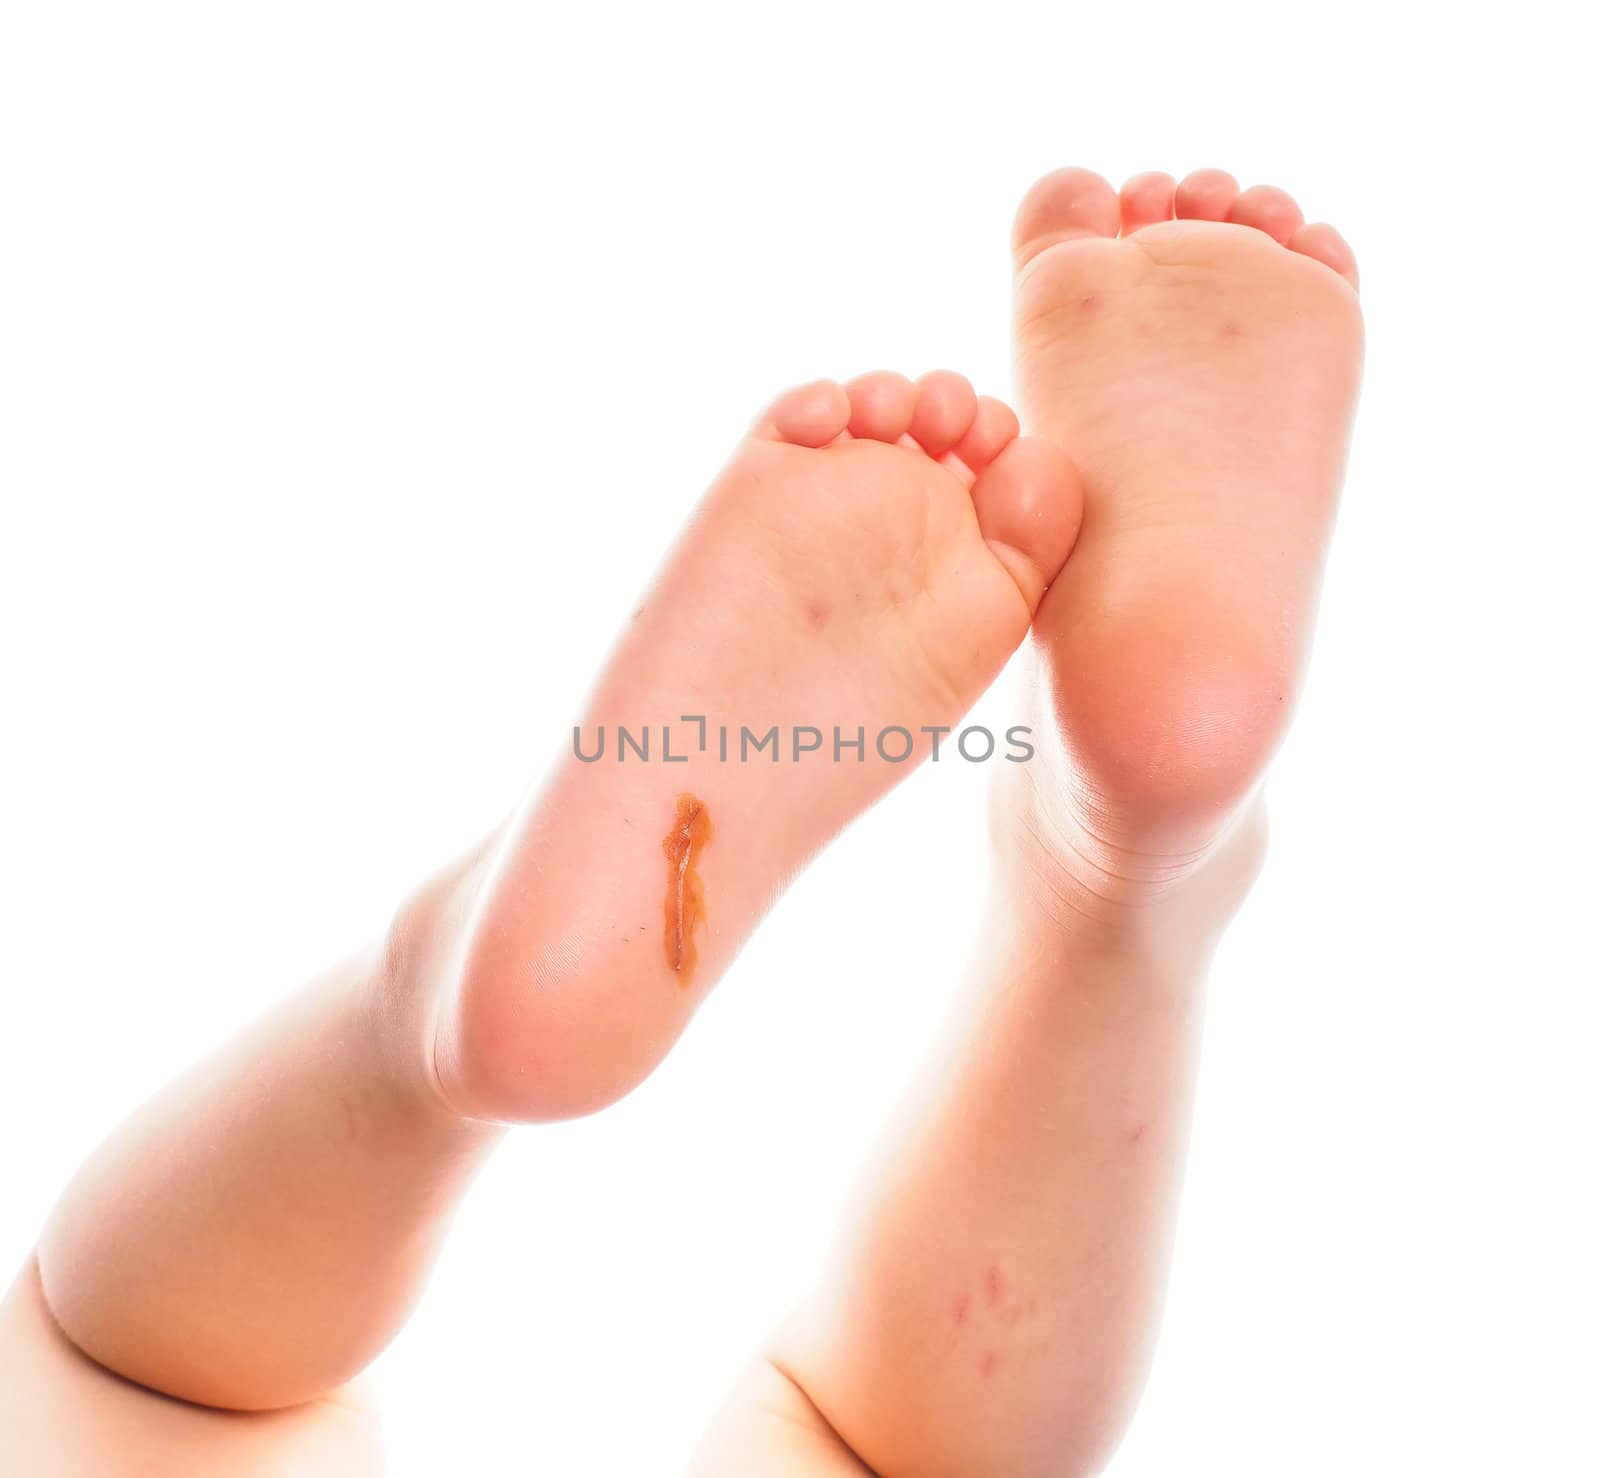 Child showing feet with a fresh wound underneath the right heel towards white